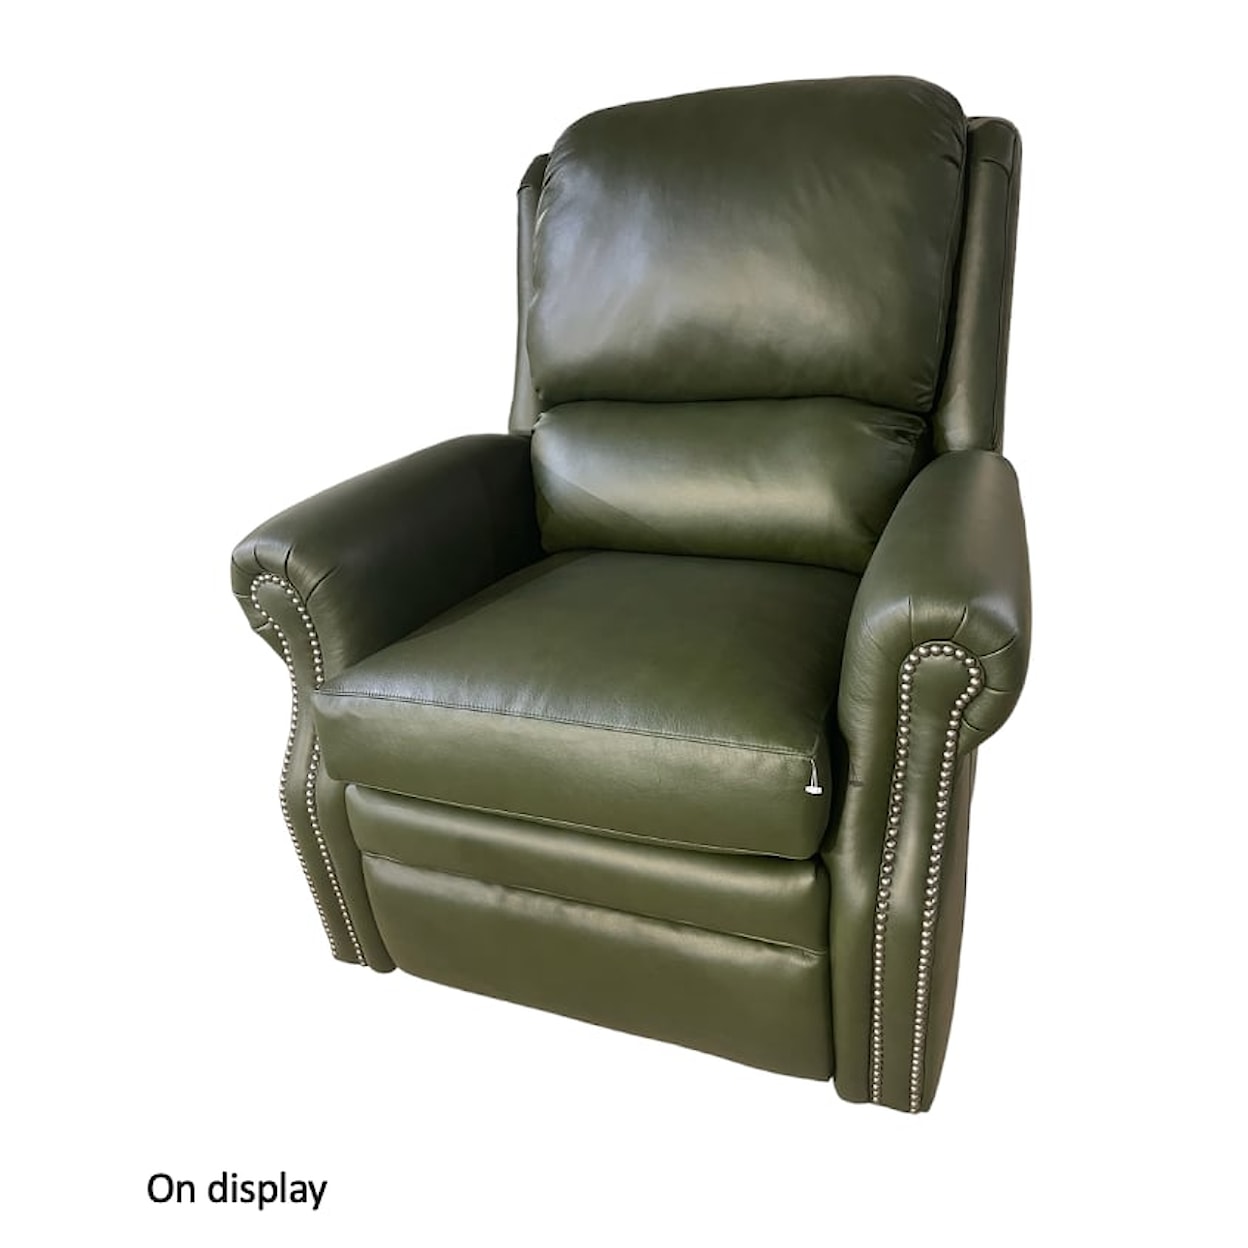 Smith Brothers 731 Swivel Glider Manual Reclining Chair